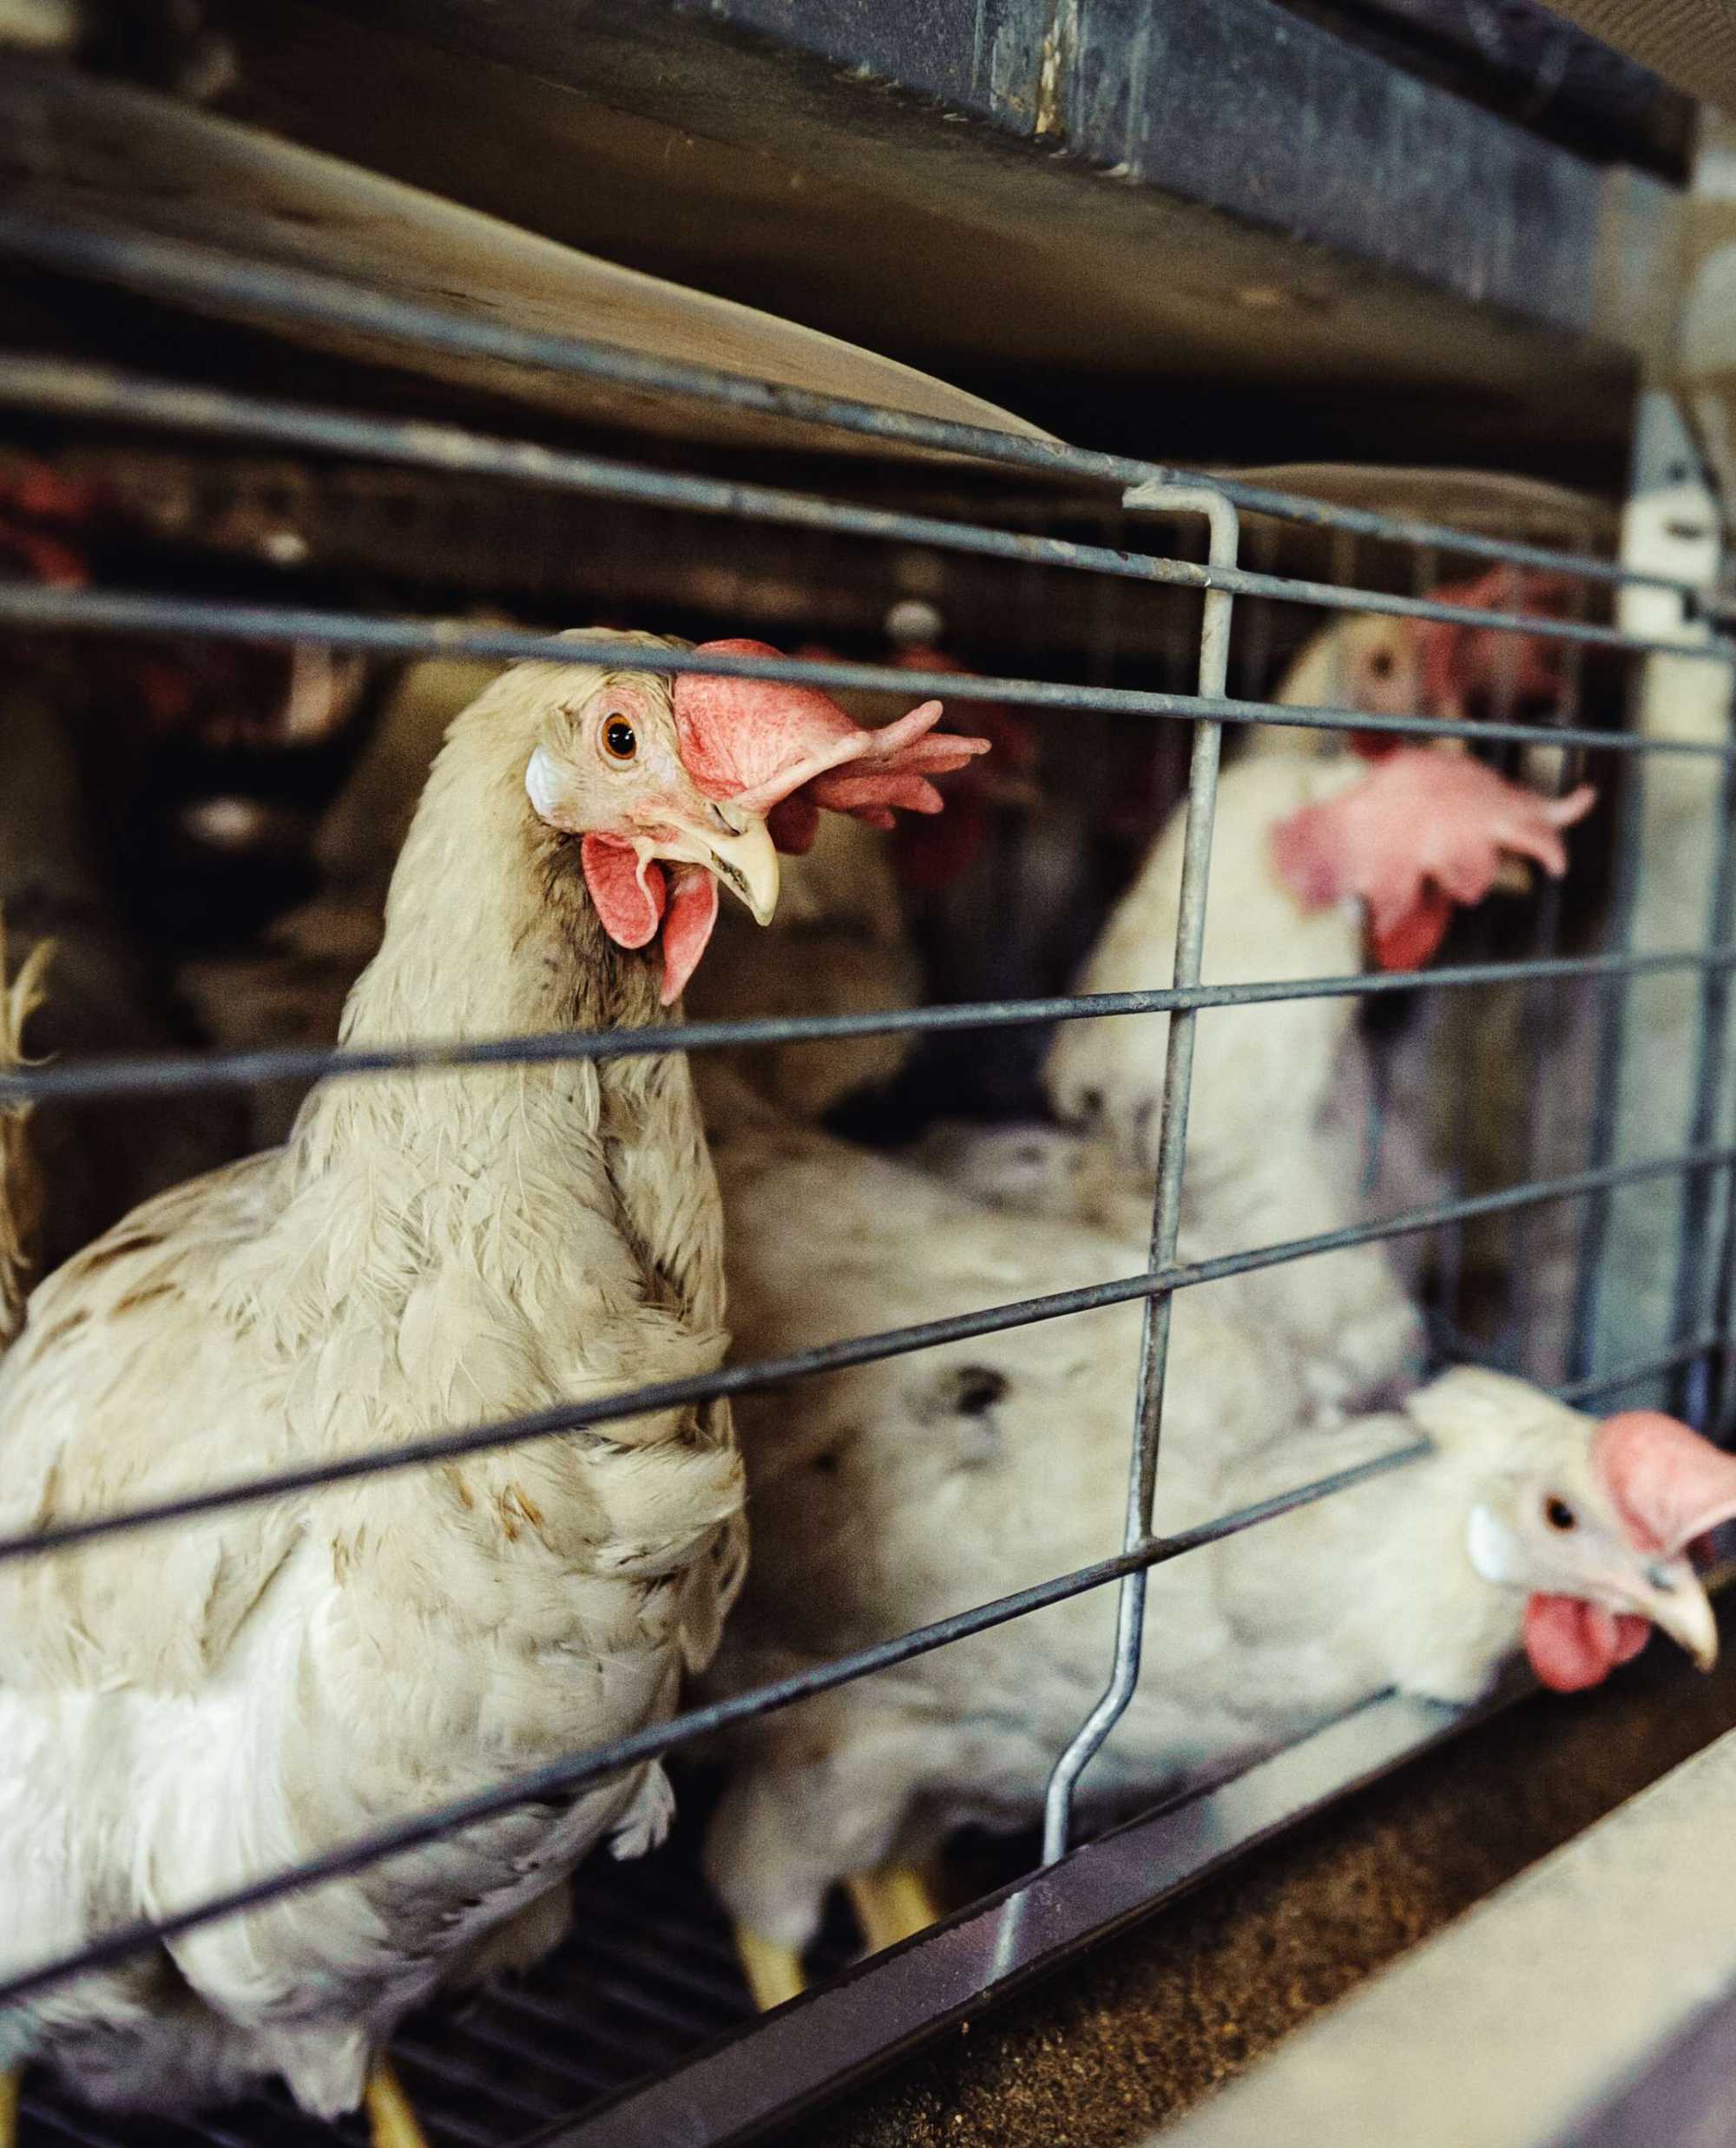 White egg-laying hens are crowded together in dusty, grimy metal cages.